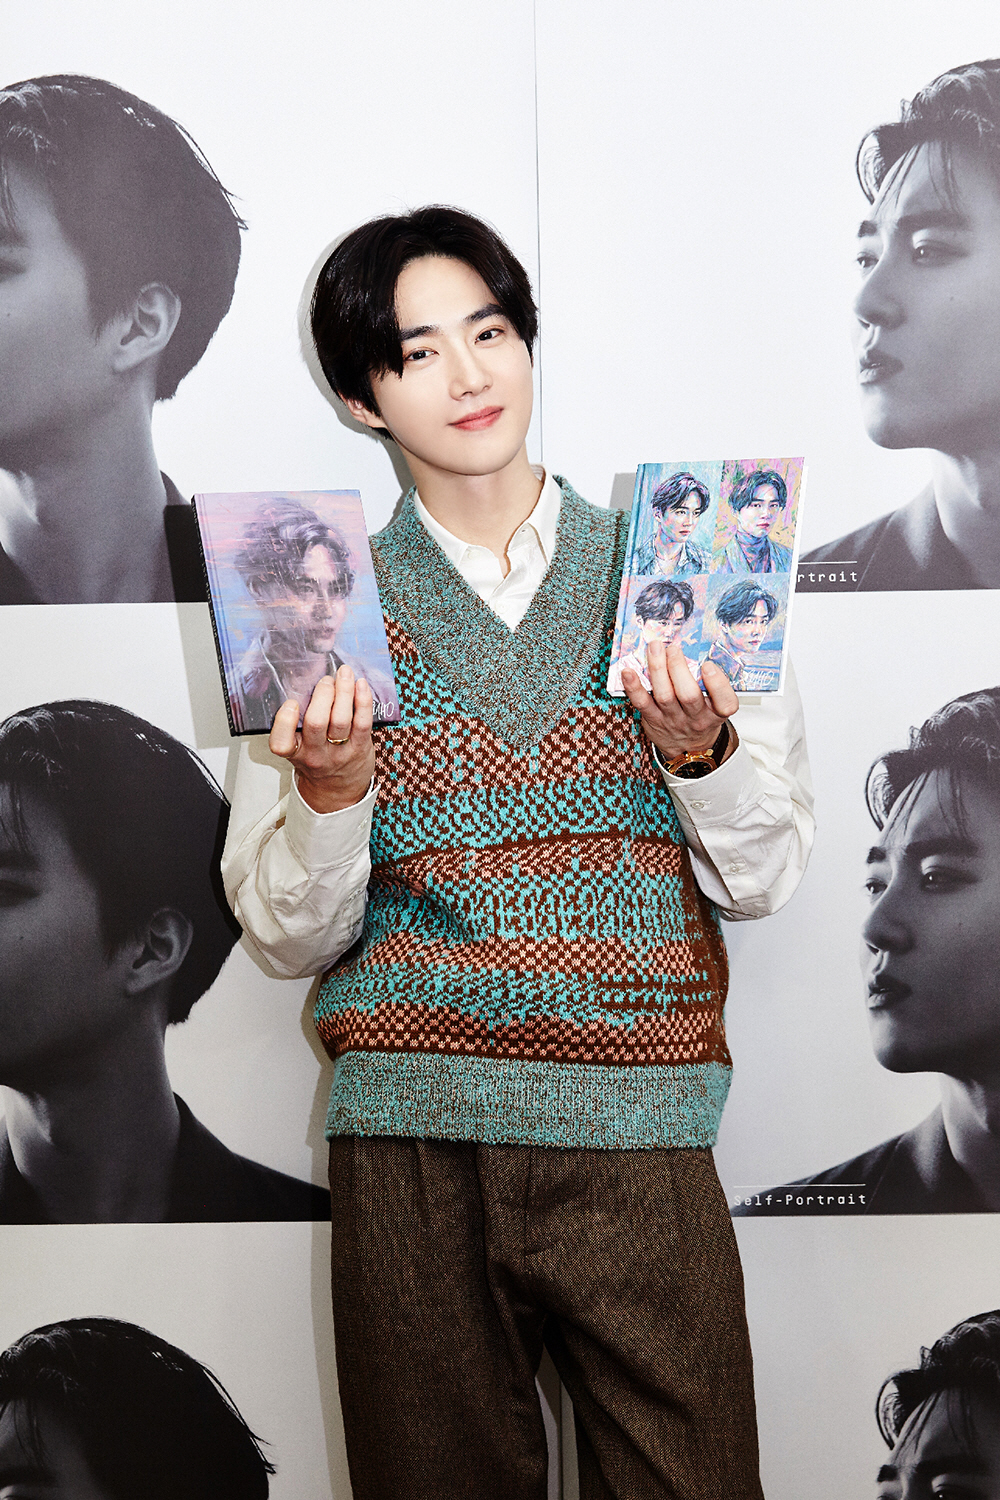 Suhos first mini-album, Self-Portrait, will be released on various music sites at 6 p.m. today, and the title song Love, Lets Love music video will also be released simultaneously on YouTube and Naver TV SMTOWN channels.Especially, it is the first time to show Solo album, so many music fans are focused on it, and Suho conveys his impressions and goals of releasing this album directly.The first mini album Self-Portrait related to Suhos answer.A. EXOel, as well as all those who love popular music, is not a music that was introduced through EXO, but it is expected that it will be the first time to show the music that I wanted to do with the color of Suho.So Im nervous, but the thrilling Feelings is the most advanced.Q2. The album is titled Self-Portrait, what did you want to reveal through this album?A. Suho, I wanted to reveal Kim Jun-myeon best, and I wanted to communicate with many people with music that expresses me.Q3. What if there is the most important part of preparing the Solo album?A. I do not care about it, but I think the most important part is the lyrics because I wanted to communicate with EXOel and many others with the lyrics that I wrote with heartfelt sincerity.Q4. I participated in the concept planning, but what ideas did I have specifically?A. I came up with the overall concept idea from the start; I was deeply inspired by Van Gogh I saw on my trip, and I wanted to make an album like My Self-Portrait from the beginning.I tried to express it through album cover, lyrics, album composition.Suho continued to meet with the production team about the emerging image, actively communicate and participate in all stages.A.As all songs will be, Love, Let is a song that gives a variety of emotions depending on the daytime and night Feelings and mood, so I think you can get a little different Feelings every time.It is a story about the universal aspect of love that anyone can sympathize with, and it is a good enough song to enjoy the atmosphere itself.Q6. I have a great affection for the team to name the title song Lets Love as the slogan of the team. What does EXO mean to Suho?A. EXO...I think its just Suho himself, I think hes been at work for 15 years in his 30-year-old life, and hes naturally permeated my life.Q7. EXO has been mainly intense concept, what do you want to show through Solo?A. Its not an intense dance song. Its lyrical, emotional, and Ive tried to tell more personal stories and to be as honest as possible.Q8. What was the reaction of the members & First, did the Solo debut member advise you?A. I said that Love, Let is the title rather than advice, and the members cheered EXO and EXOel more because it was meaningful music.Q9. What kind of relationship do you have with Younha and what if there is a singer who wants to collaborate in the future?A.Your Turn (For You Now) on this album was originally a solo song, and I thought it would be much better if I was with female vocals, so I suggested that I want to be with senior Younha.I would like to thank you for your participation, and I would like to take you on stage with Nell if you have a chance someday because you like Nell from the past.Q10. What if there is a plan or goal for this Solo album?A. I hope that this album will give my heart to EXOel rather than big goals or plans, and I hope it will be a good opportunity to listen to my voice and my music to many people.